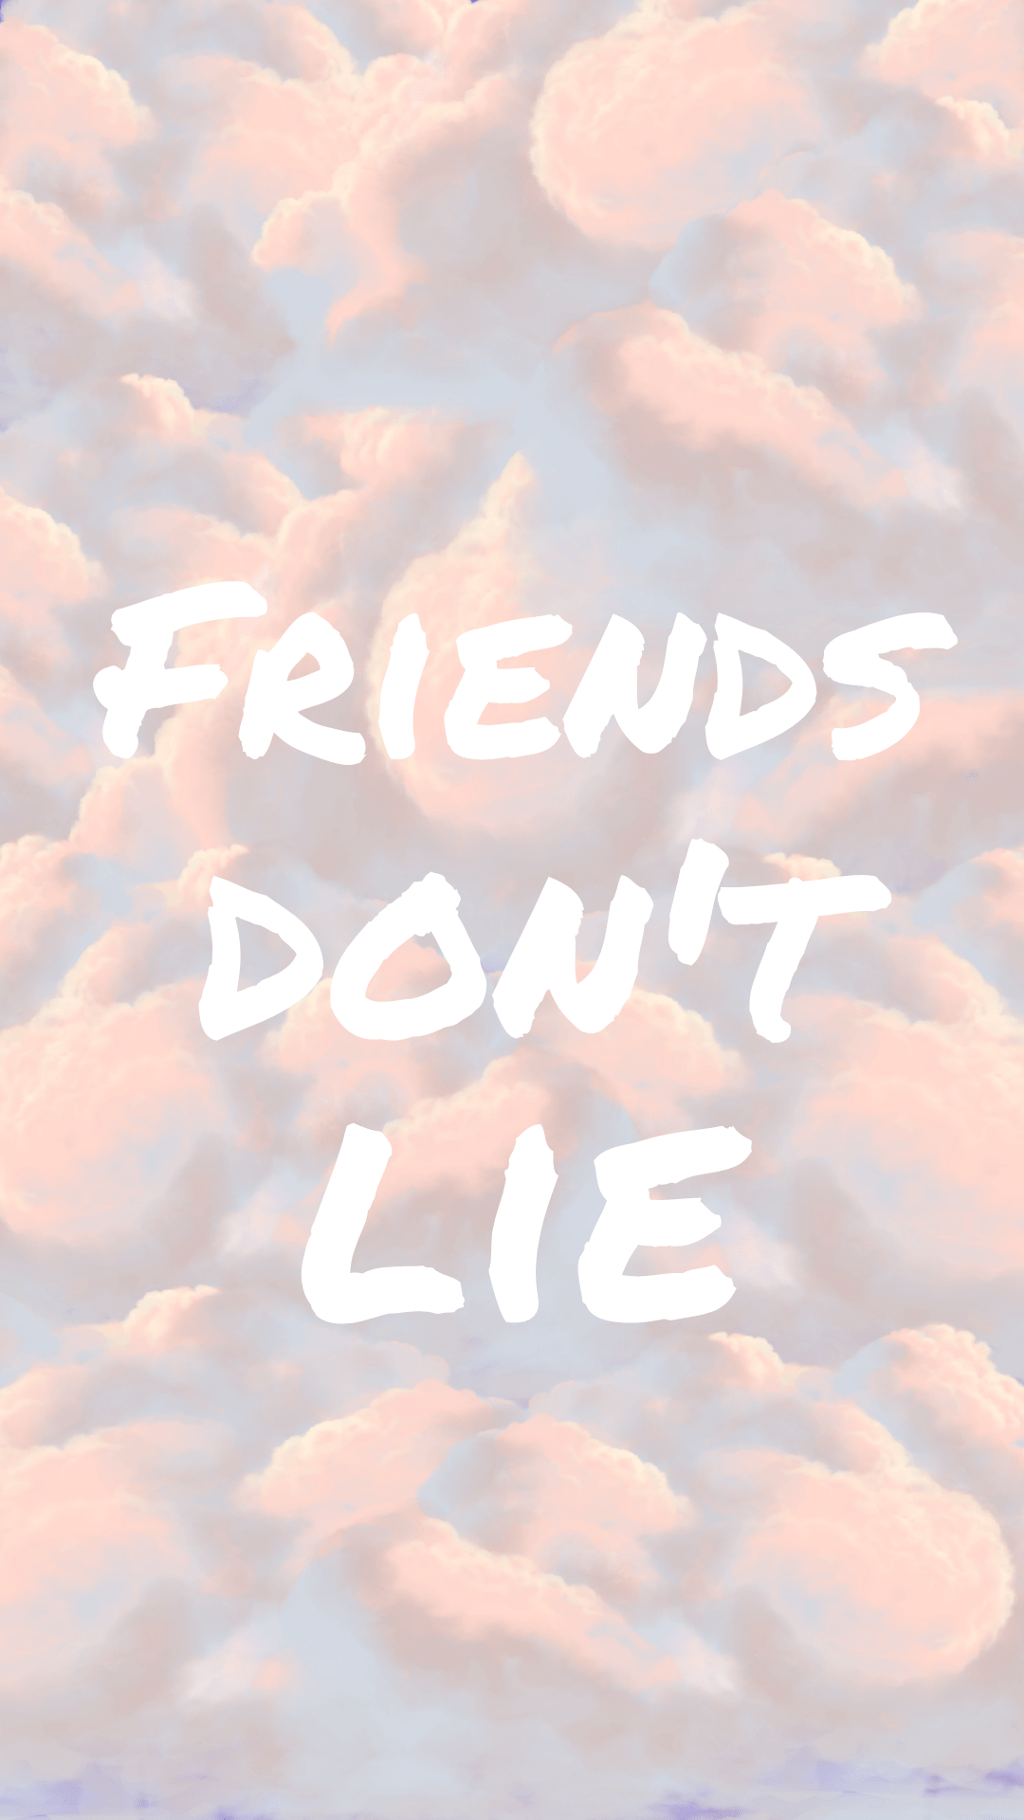 Friends Dont Lie  Stranger Things Eleven quotes wallpaper background   Stranger things quote Stranger things pins Eleven stranger things